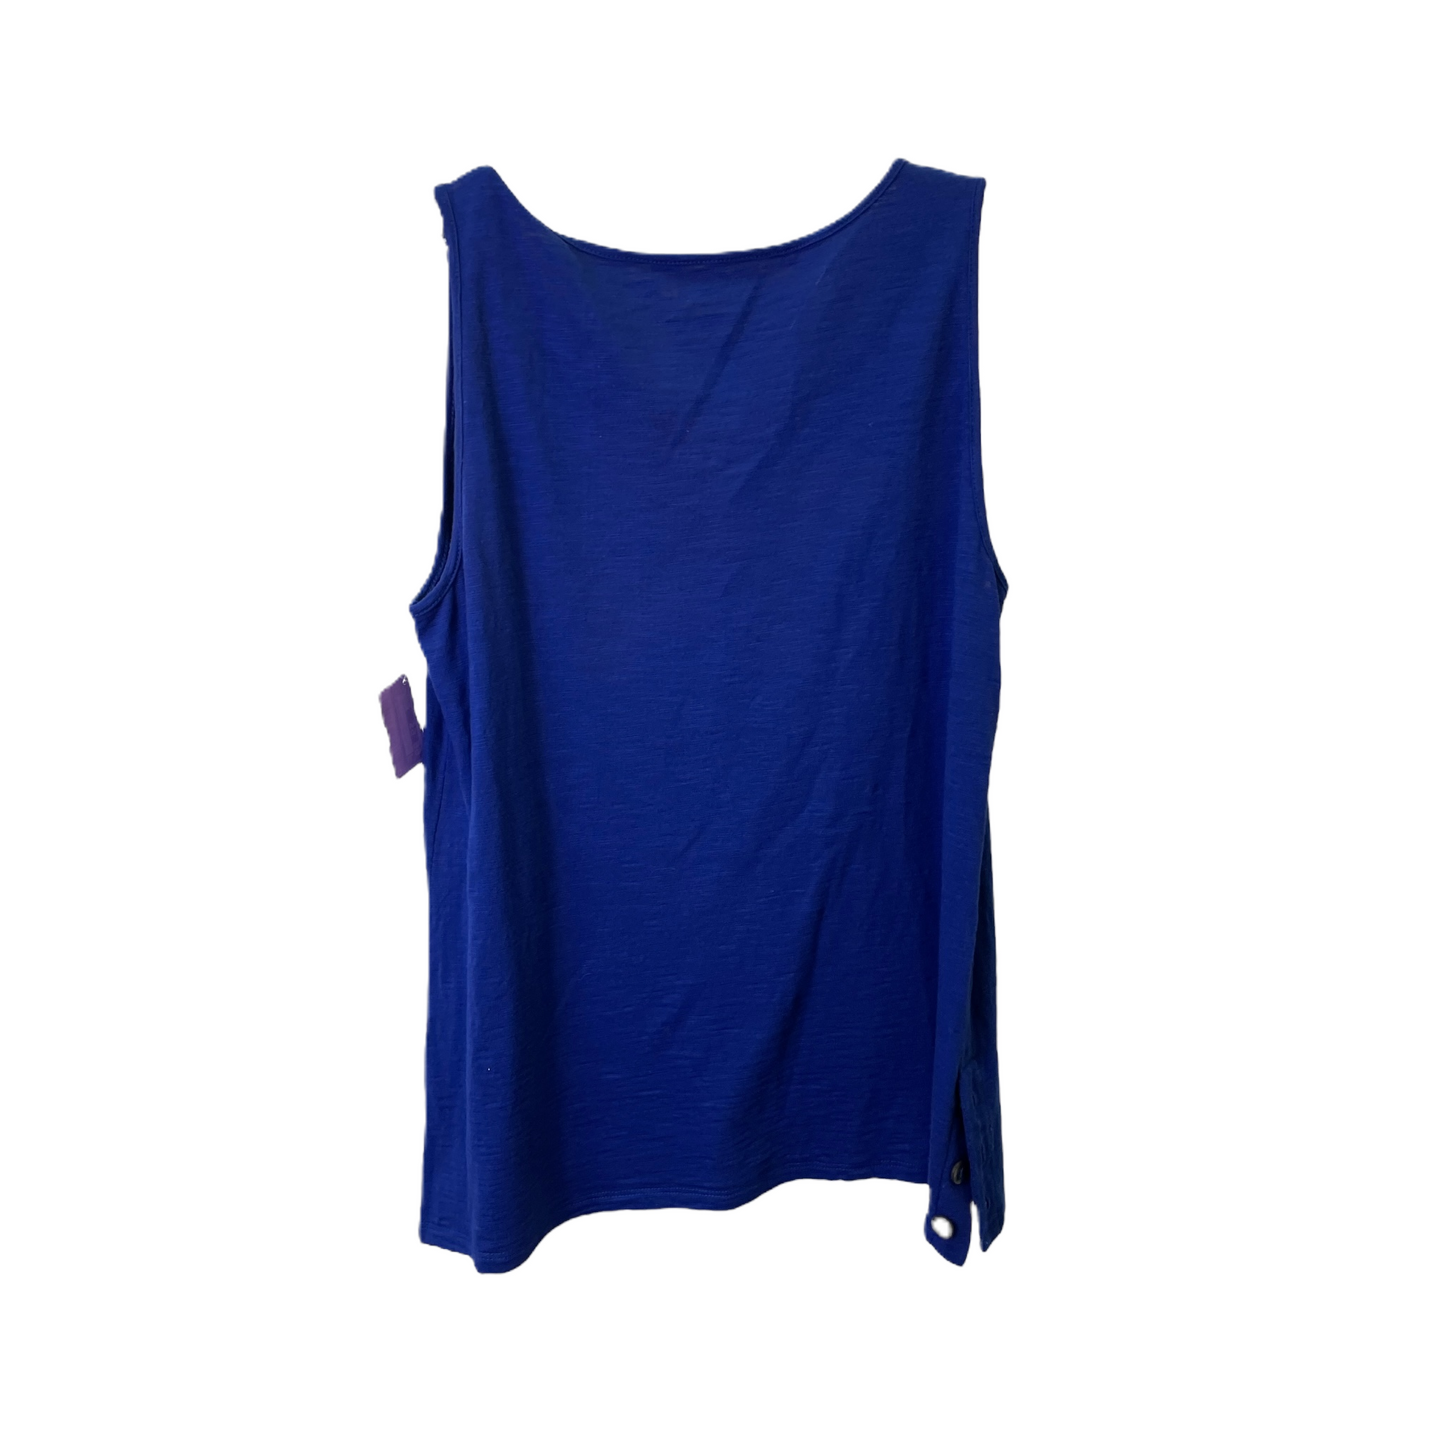 Blue Top Sleeveless Basic By Chicos, Size: M